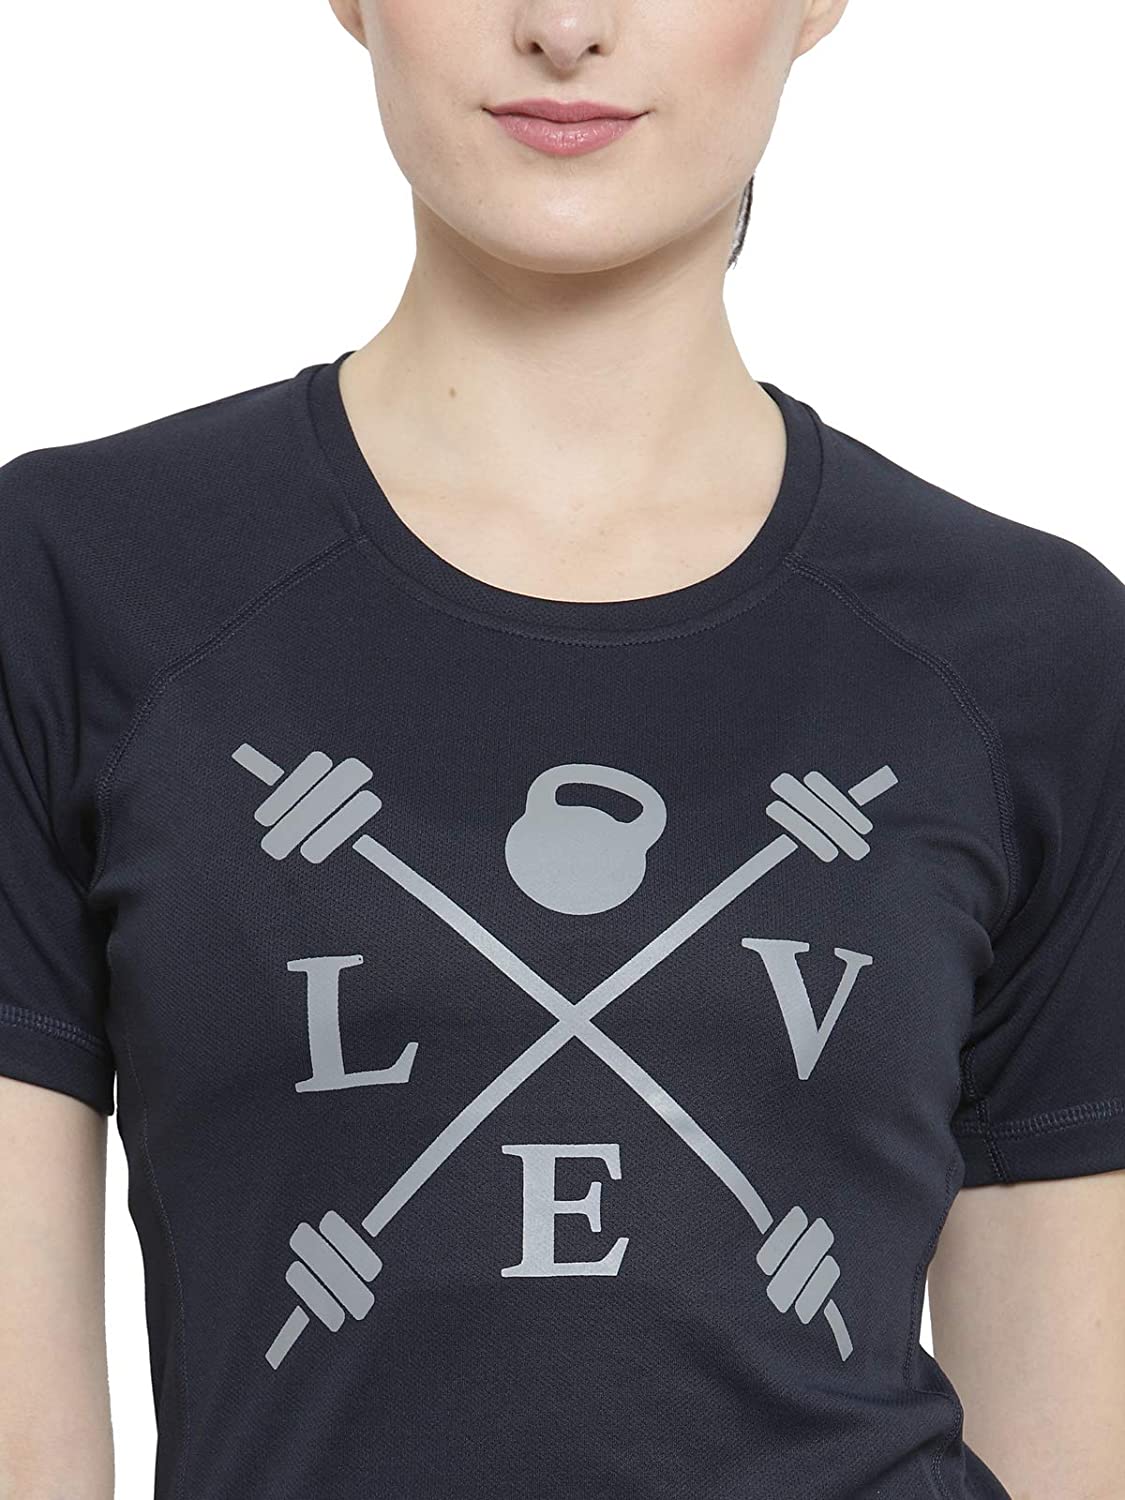 Invincible Women's Gym Love Round Neck Workout T-Shirt